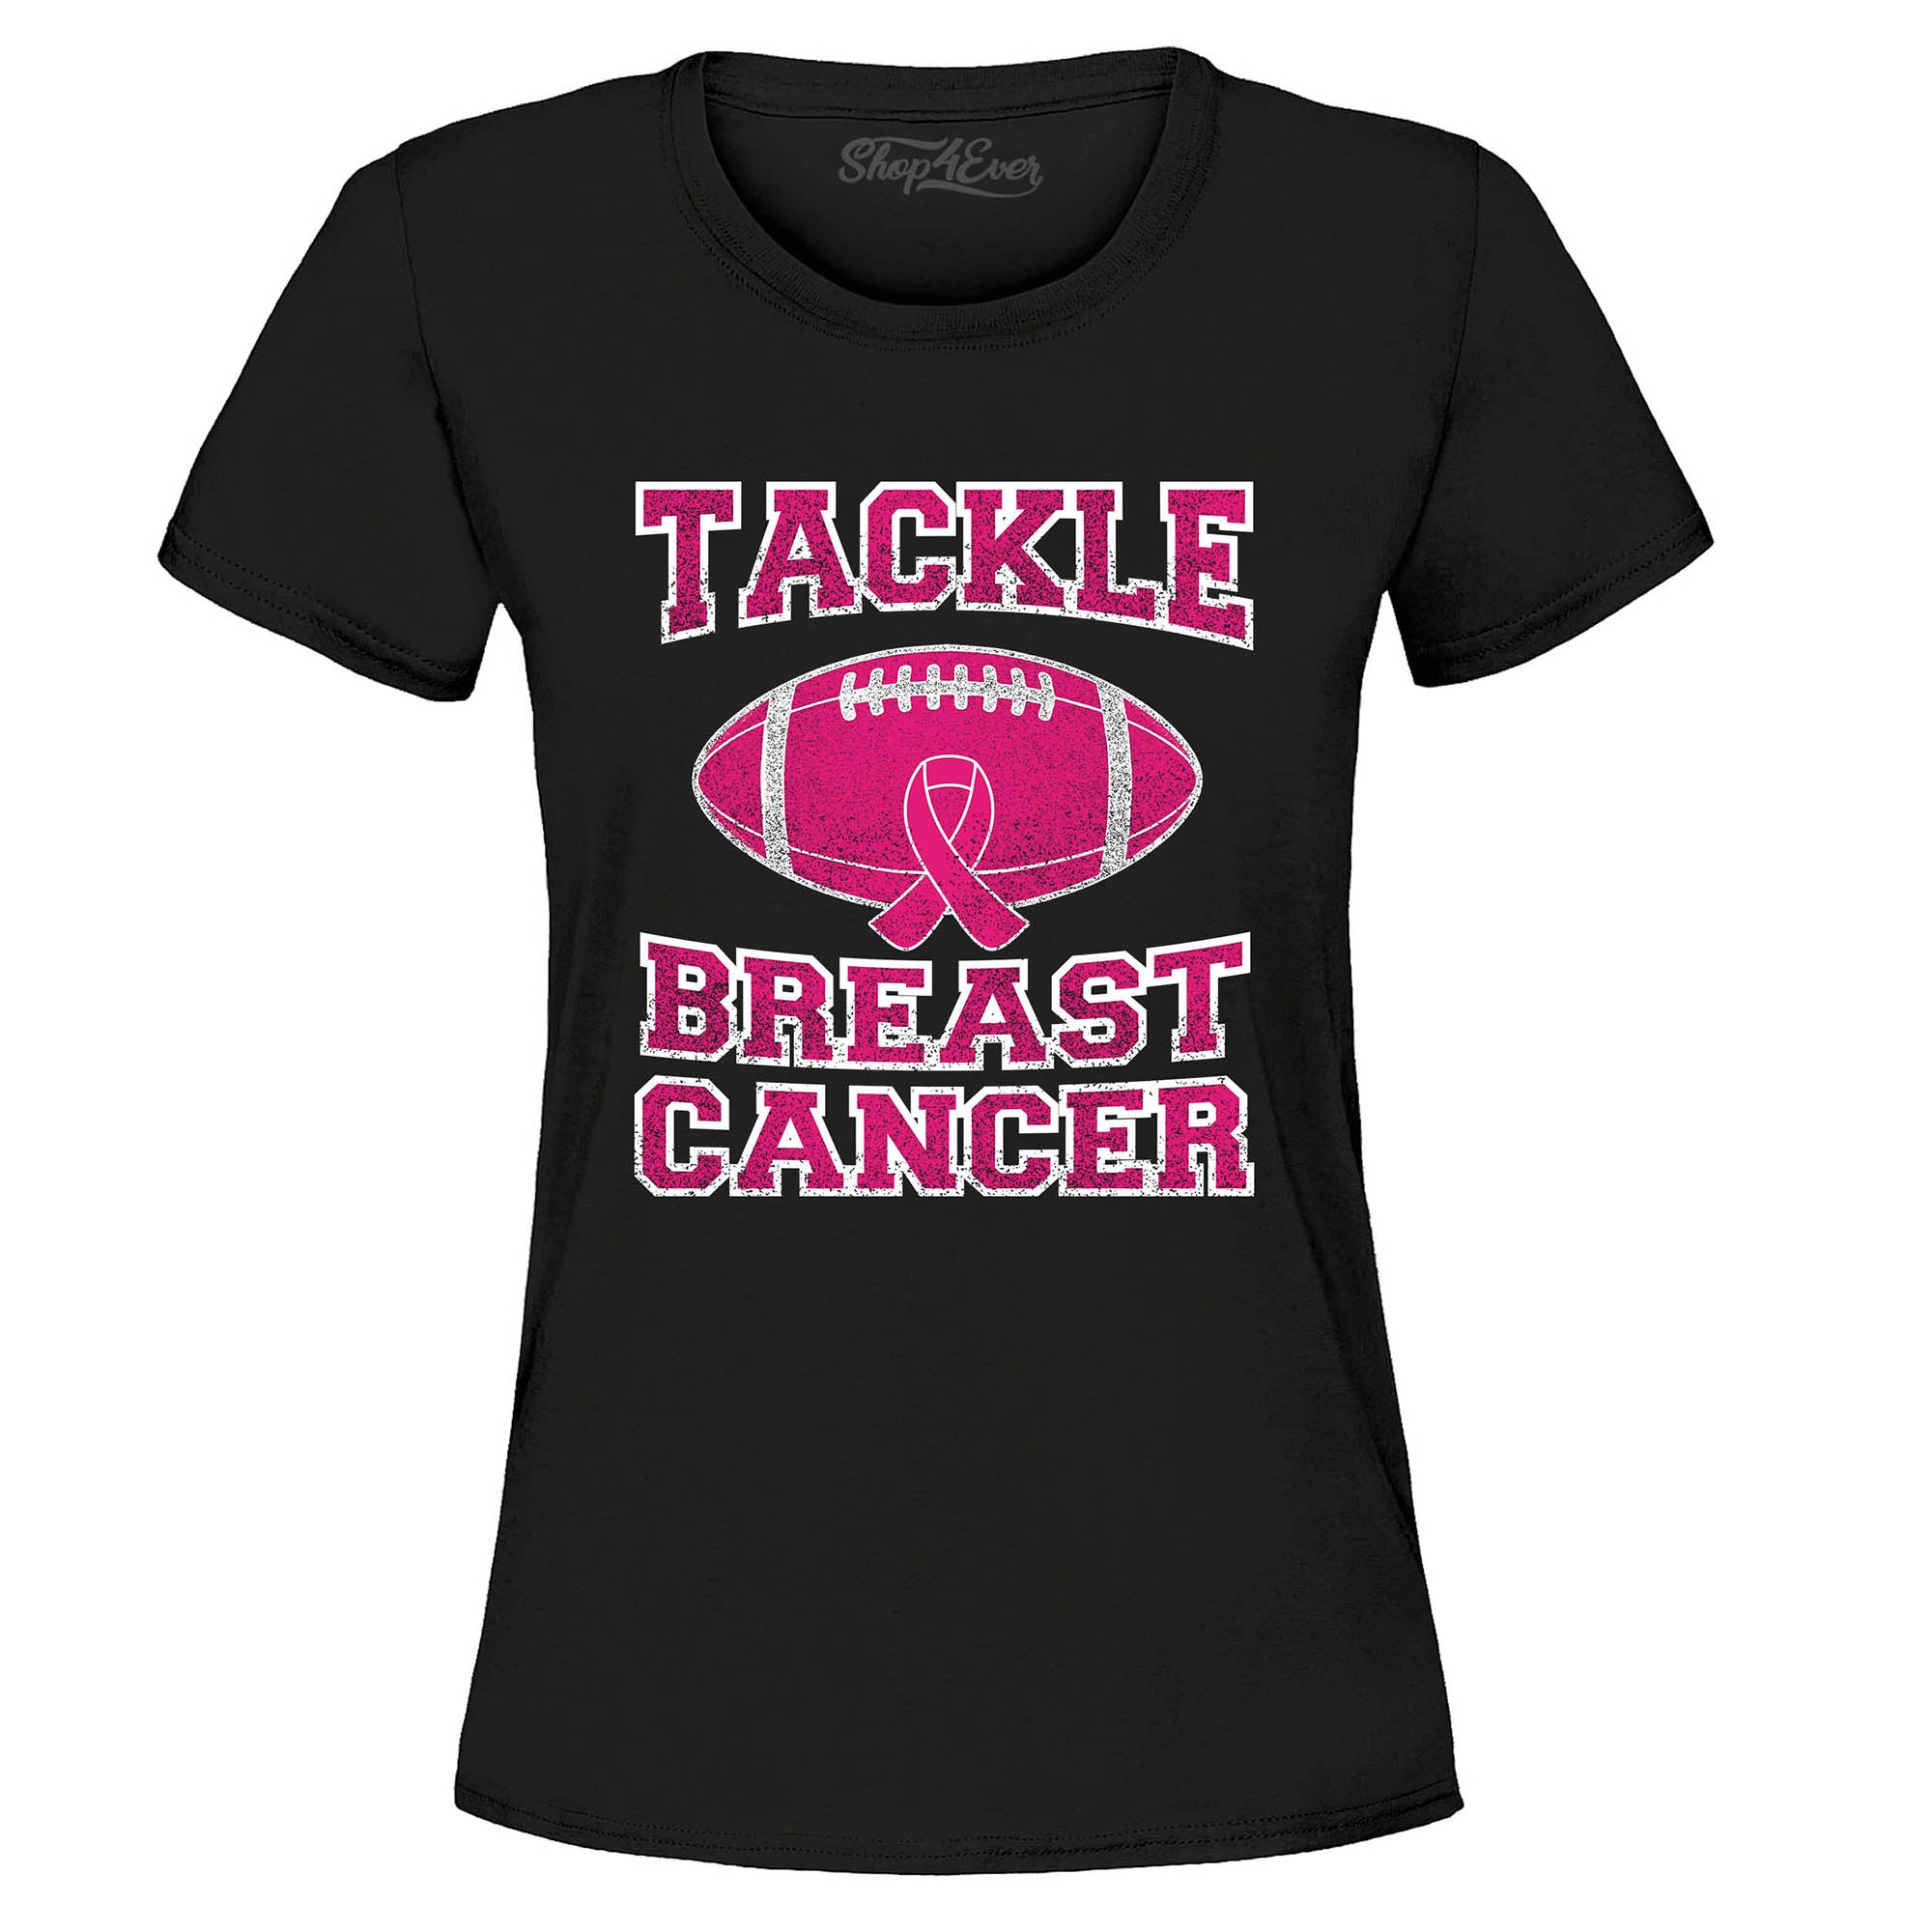 Tackle Breast Cancer Awareness Women's T-Shirt Supportive Football Tee